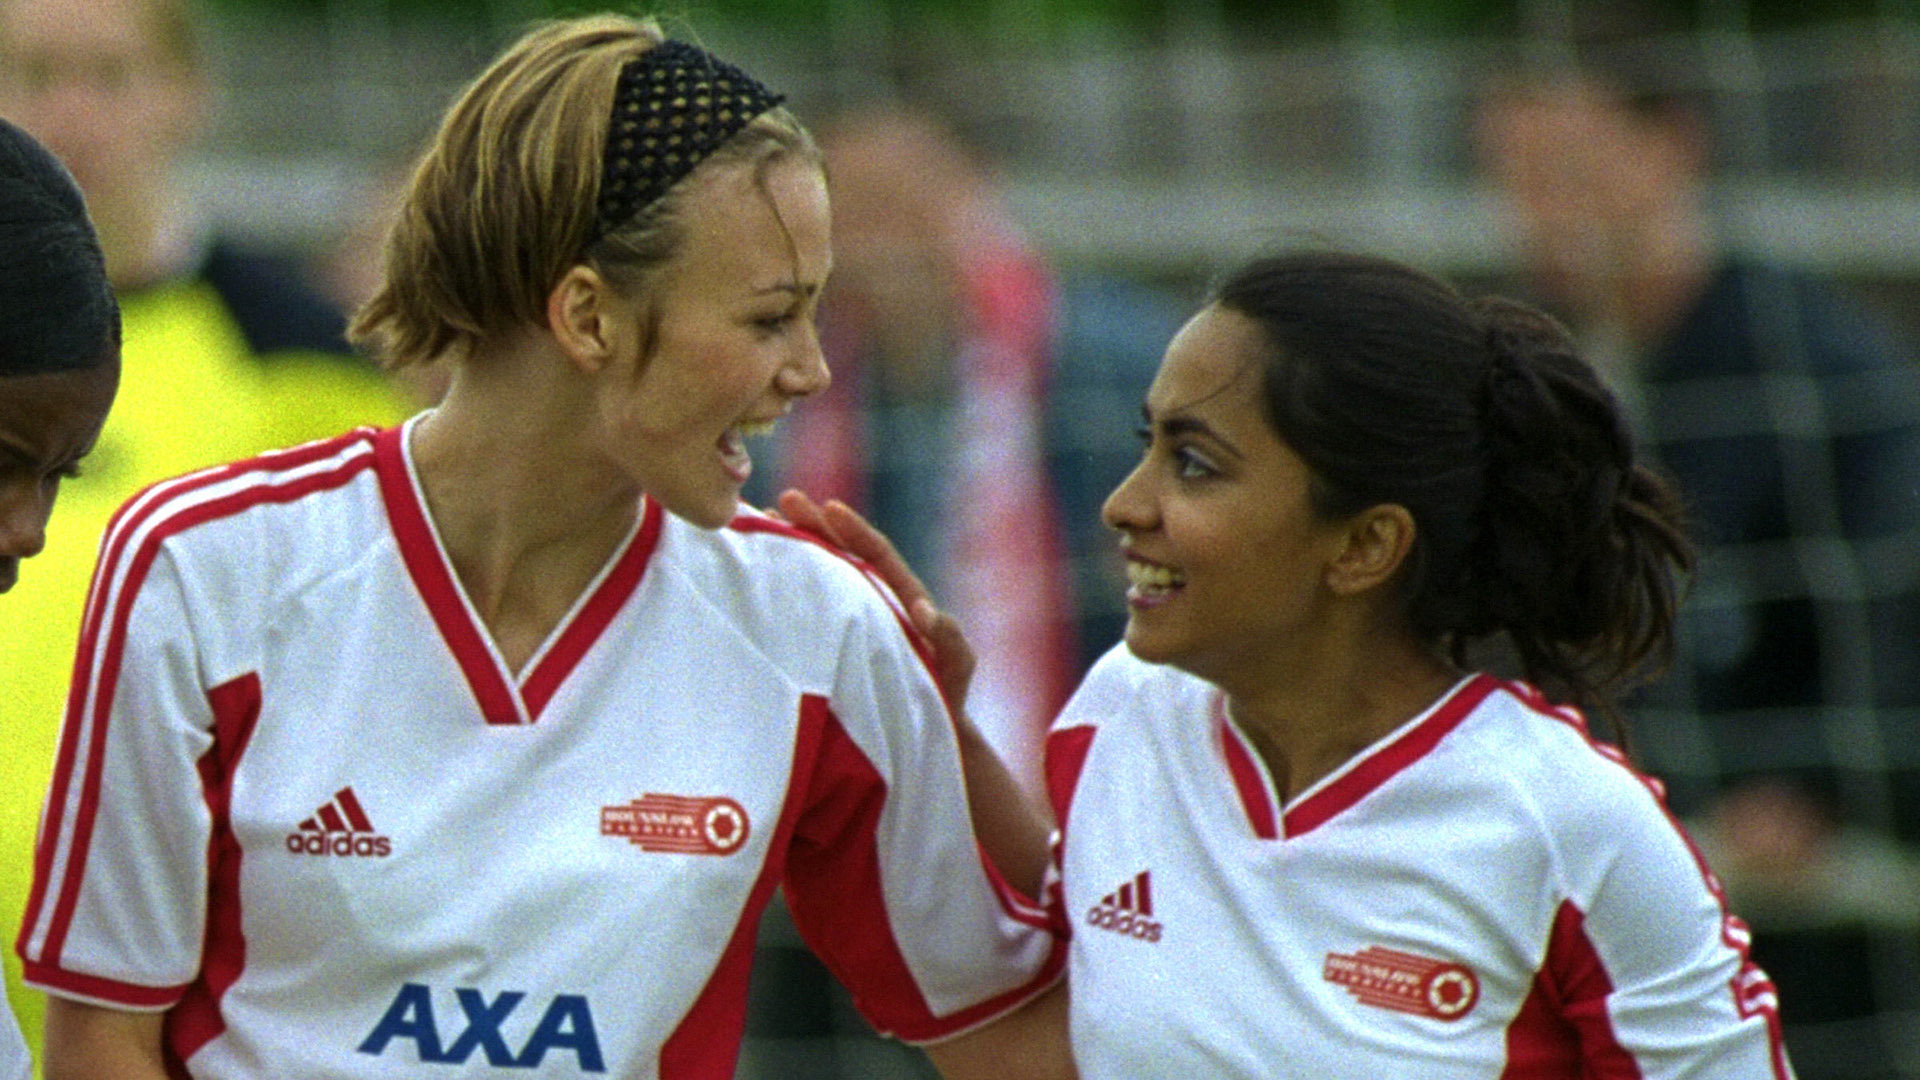 Then and Now: See the Cast of Bend It Like Beckham 20 Years Later in 2023